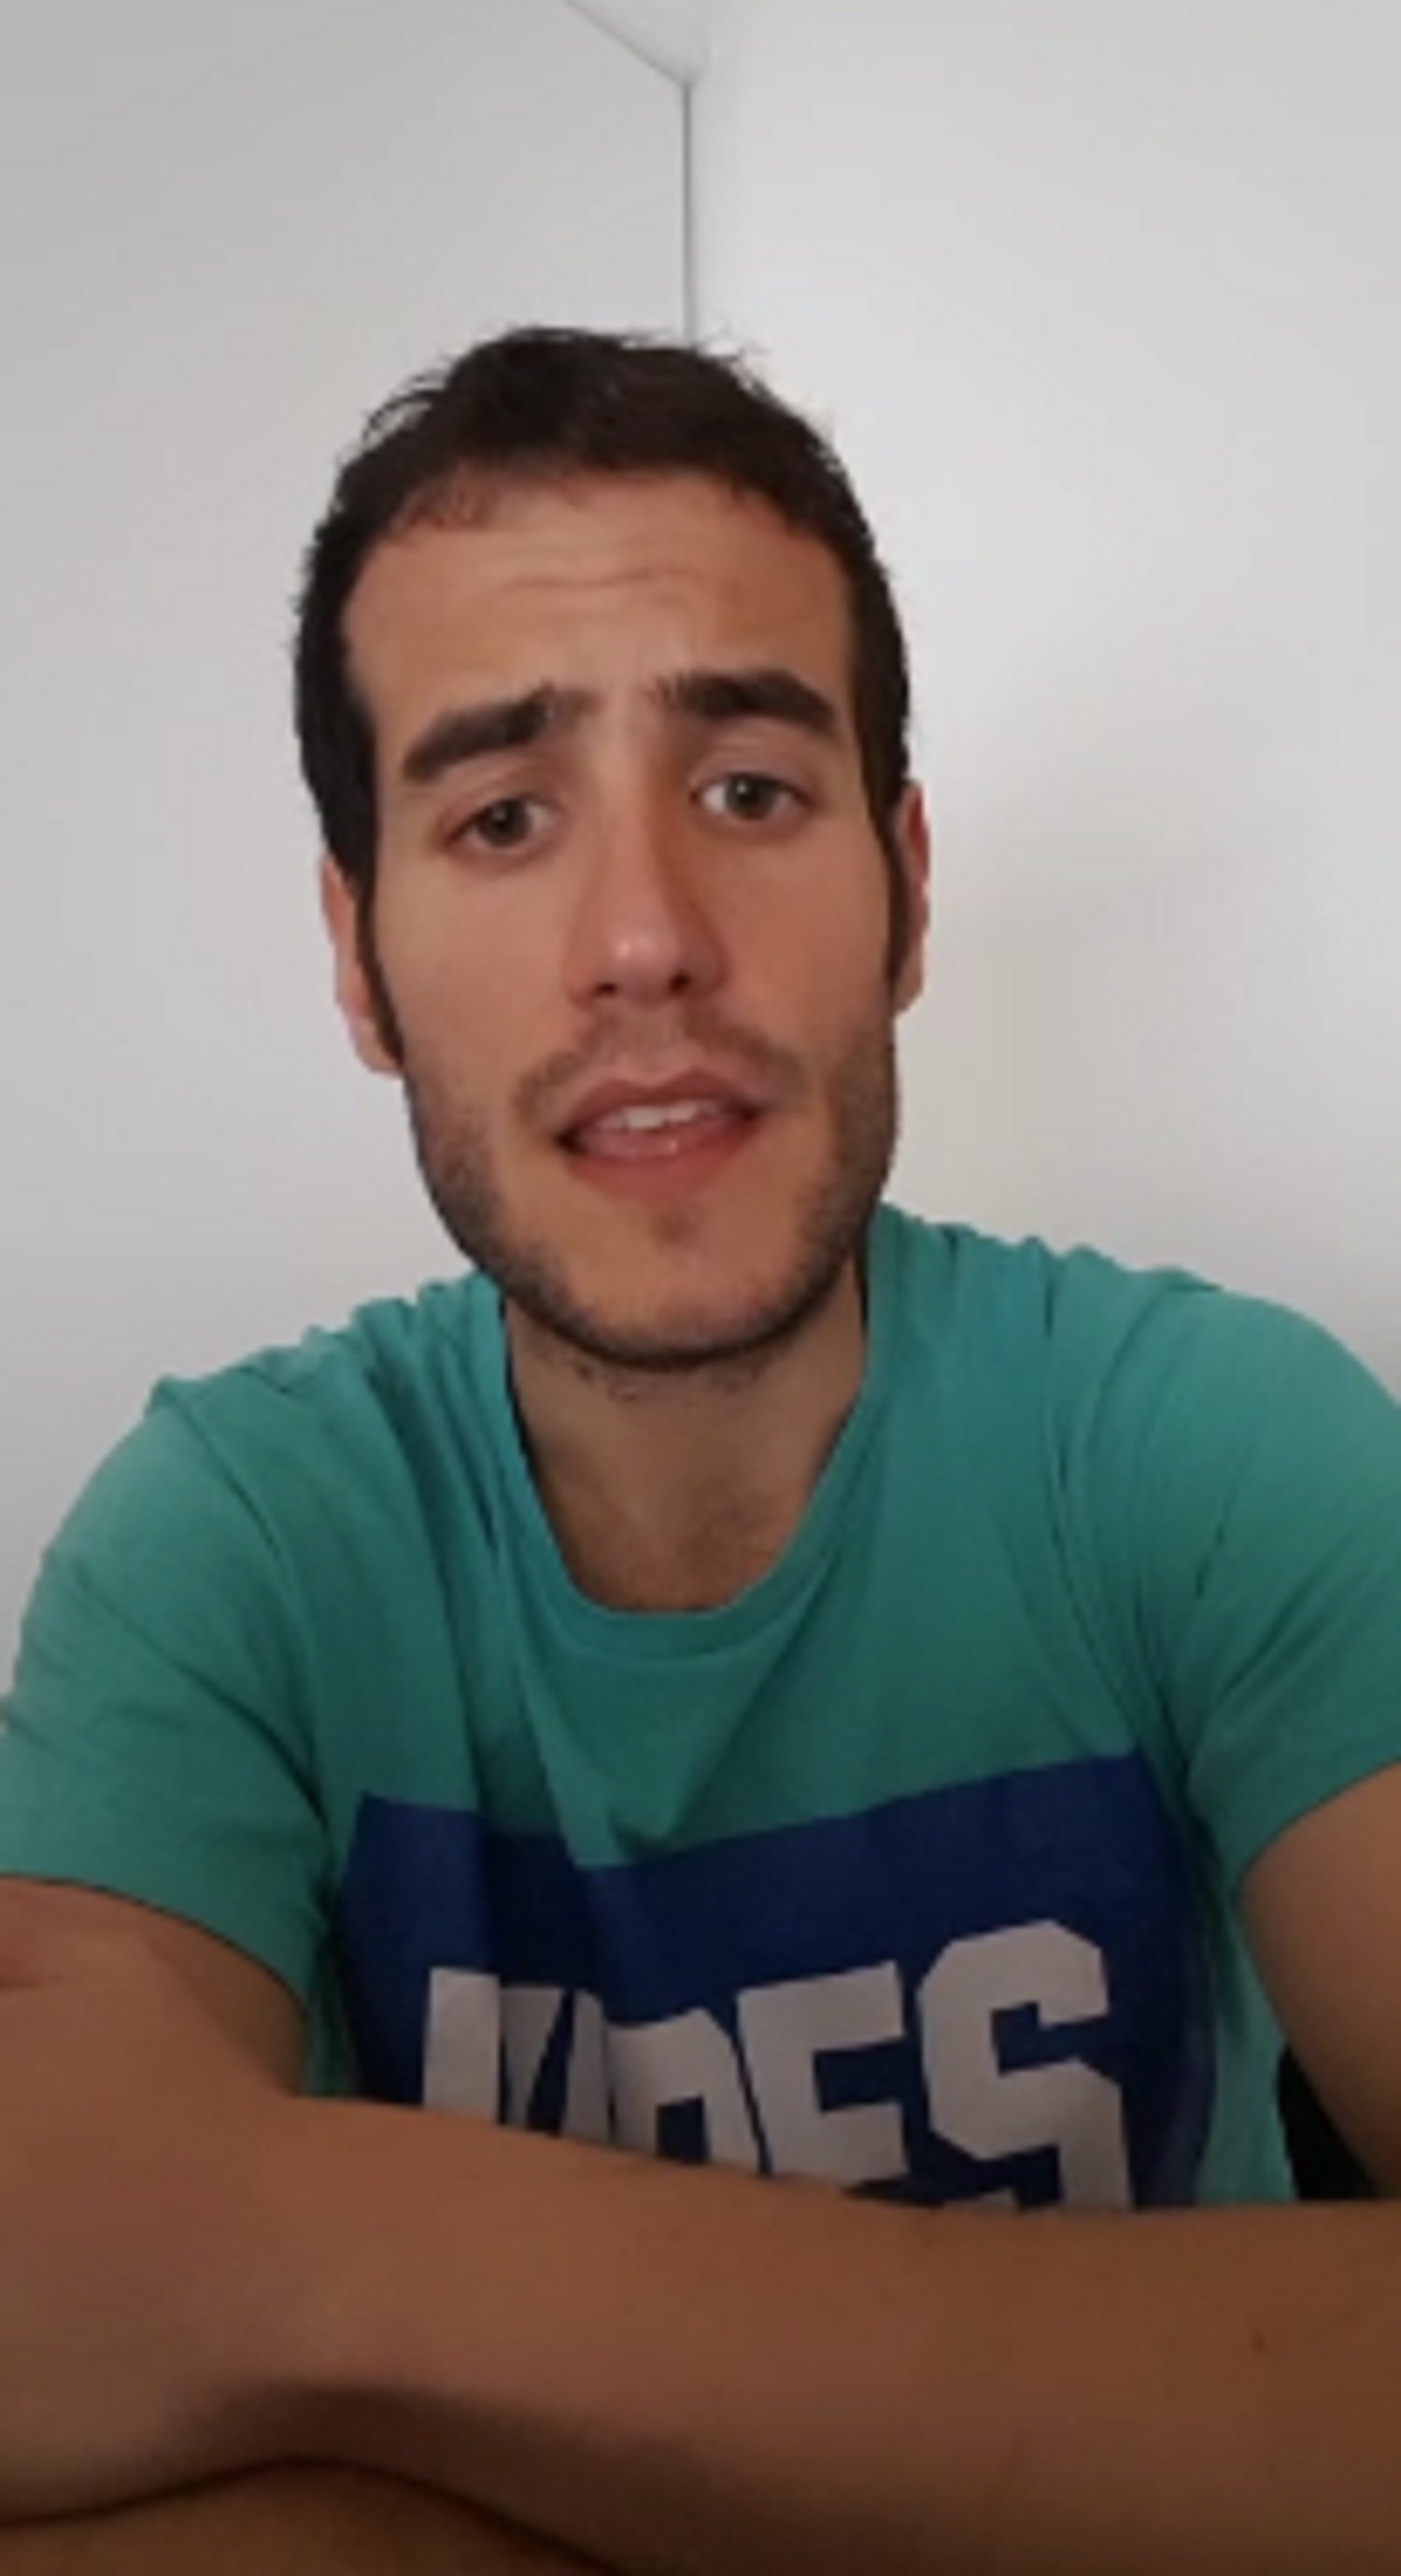 VIDEO | The heartfelt message of a Catalan who lost his grandmother to coronavirus